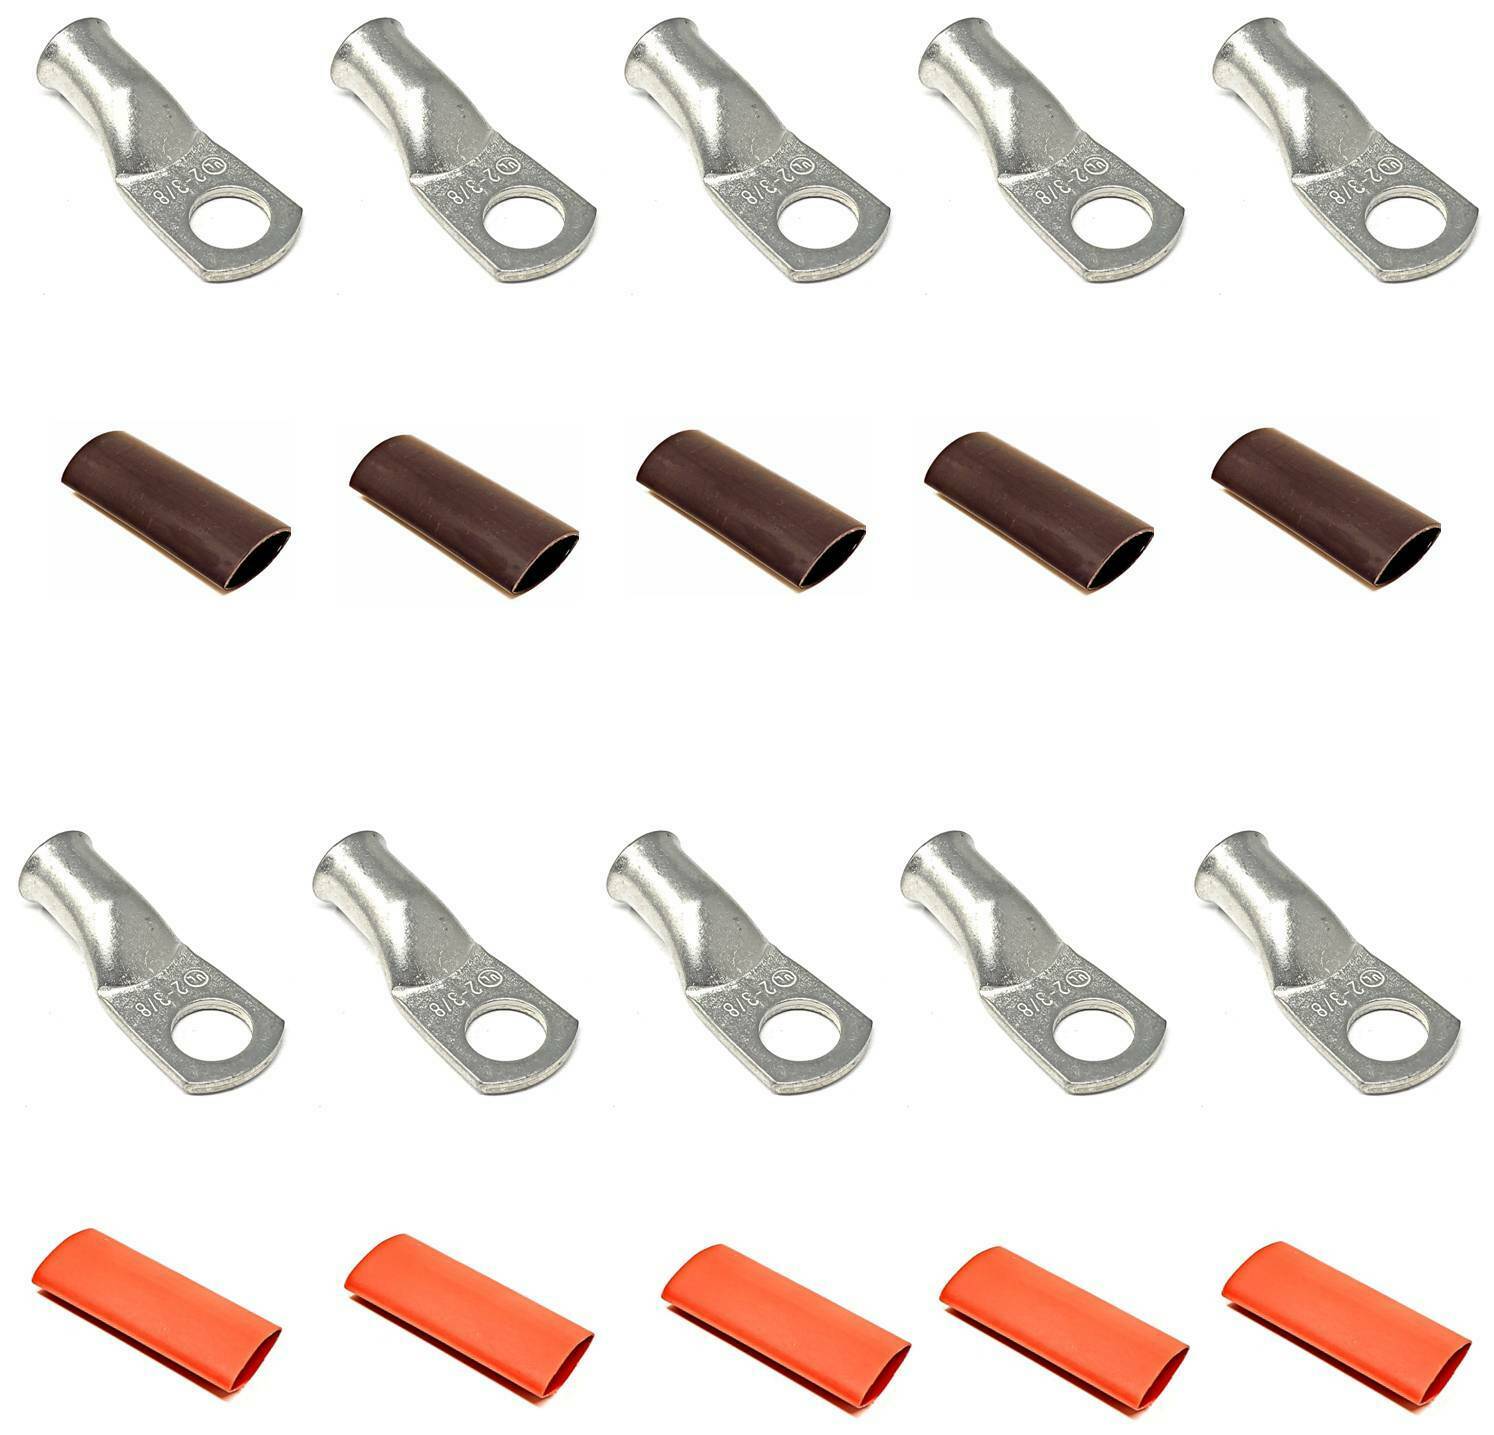 UL Tinned Copper Cable Lug End Terminal Ring Connectors + Adhesive Shrink Tubing